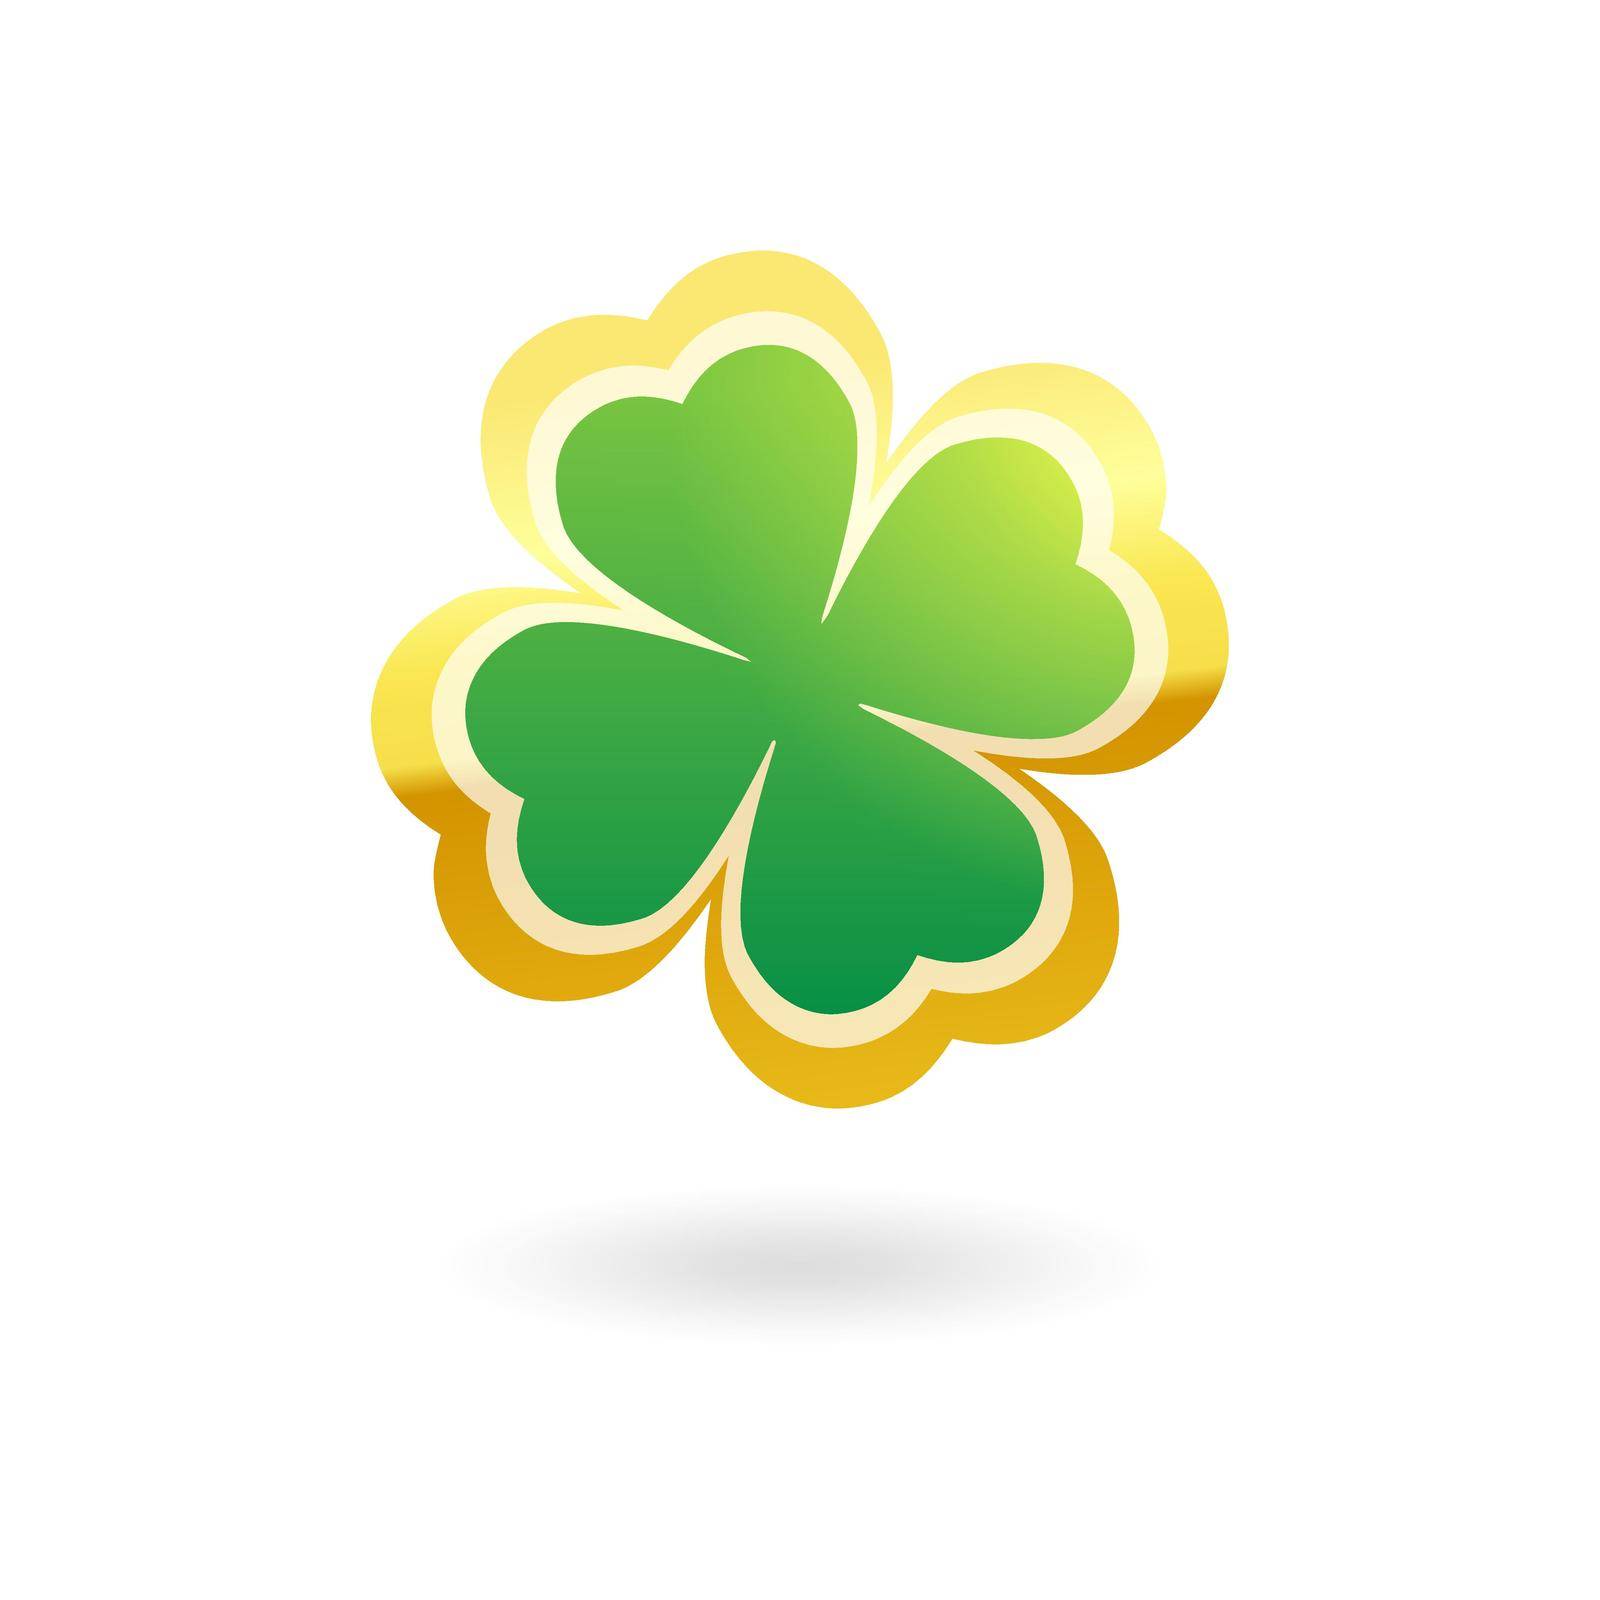 Irish Clover in style design, Vector Icon for Saint Patrick Day